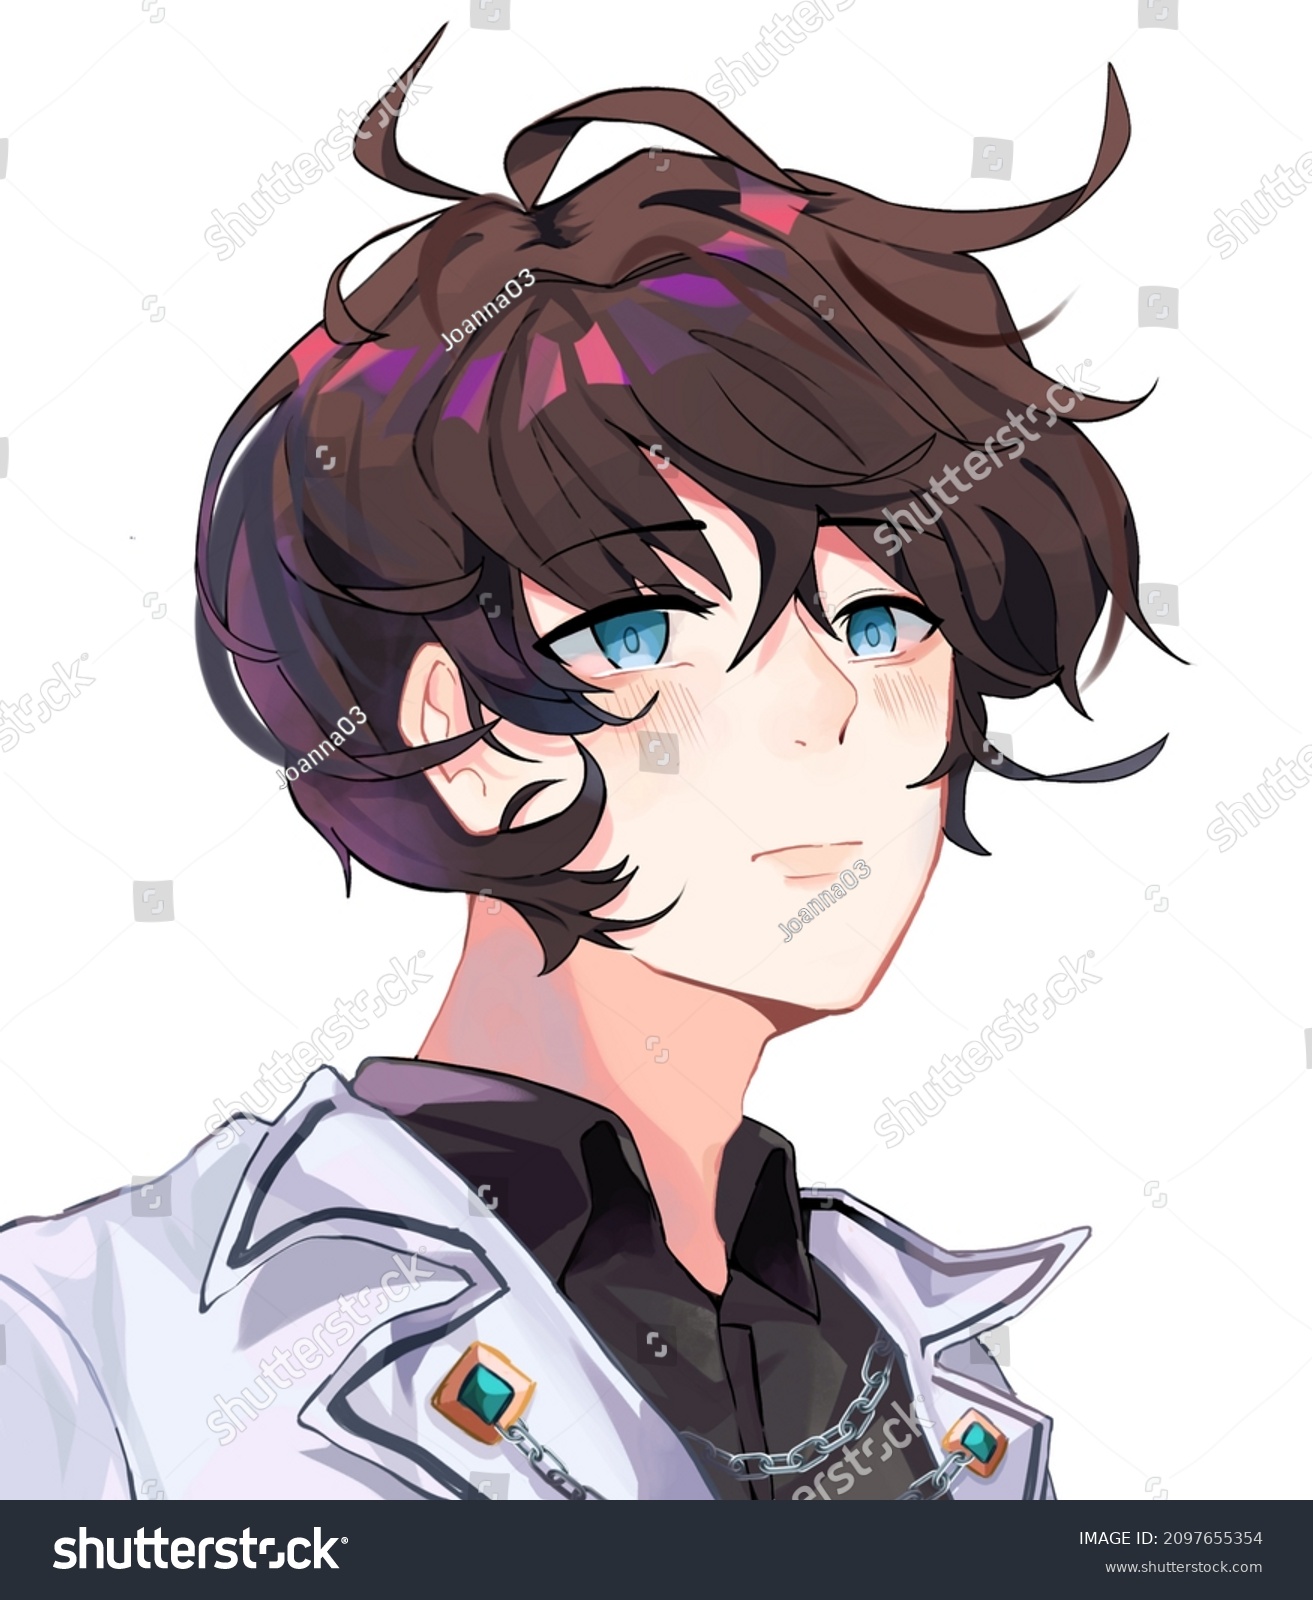 Anime Boy With Brown Hair And Blue Eyes